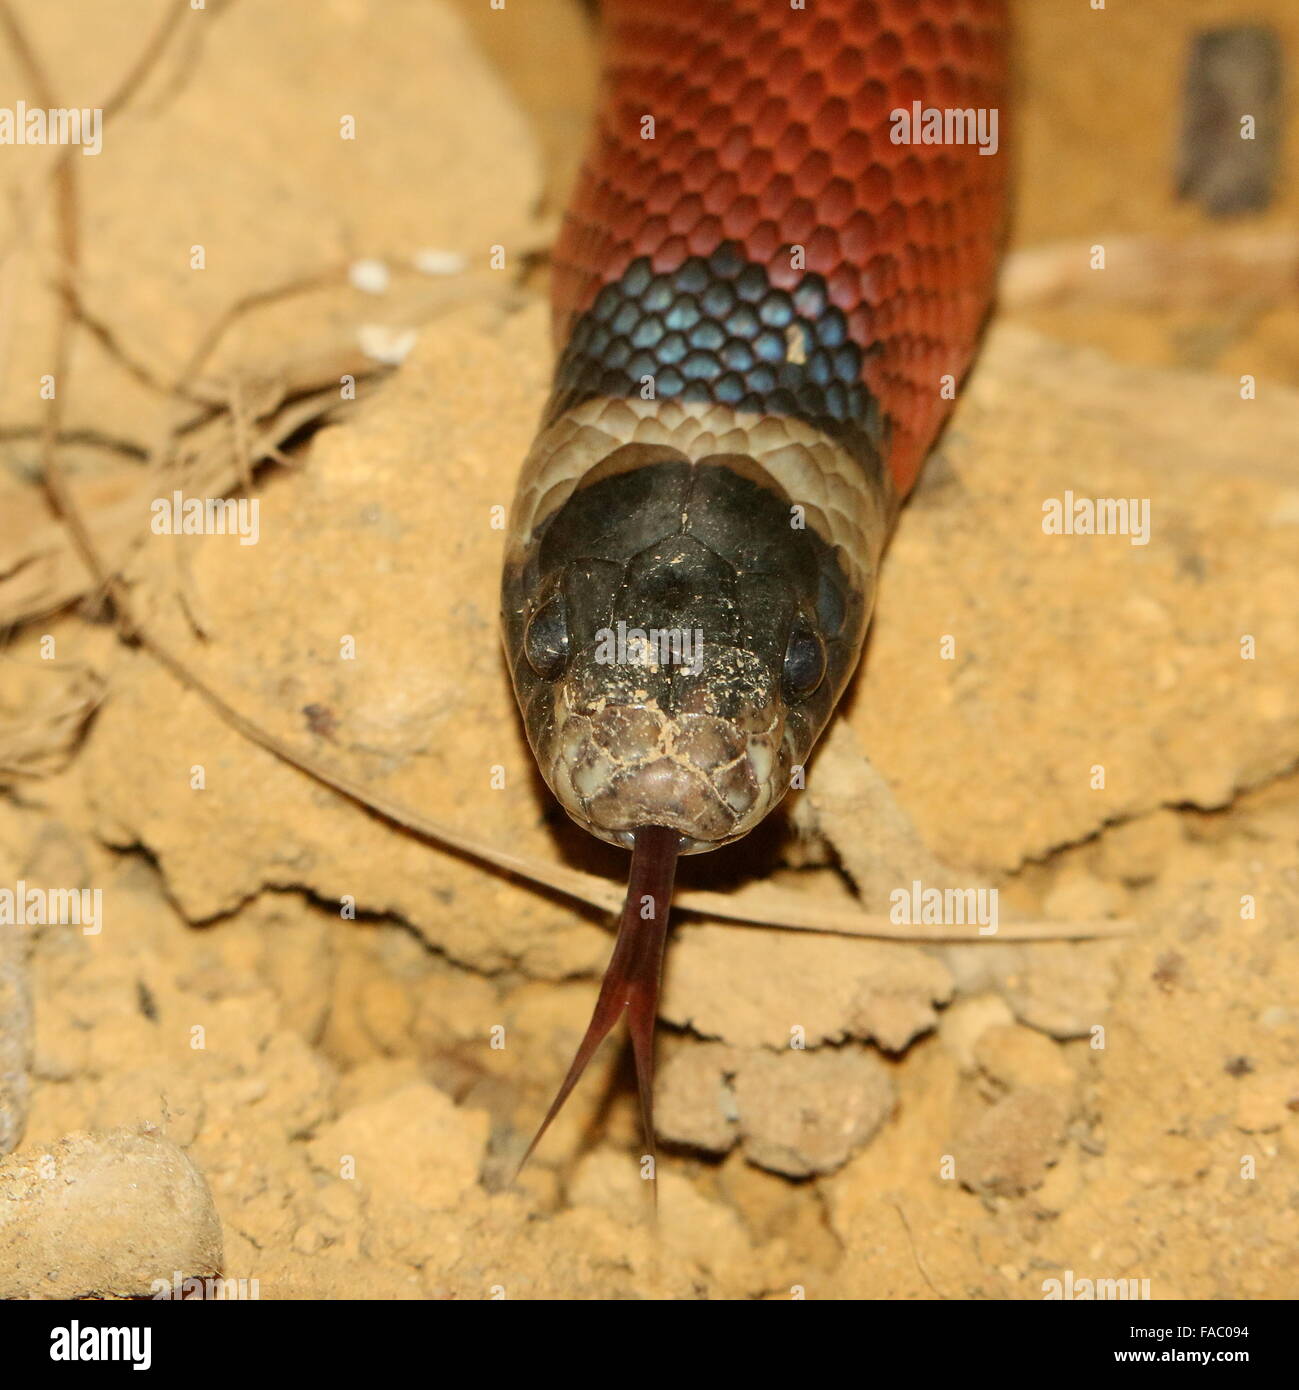 North Mexican Milk snake ( Lampropeltis triangulum), closeup of the head, forked tongue coming out, sniffing the air Stock Photo